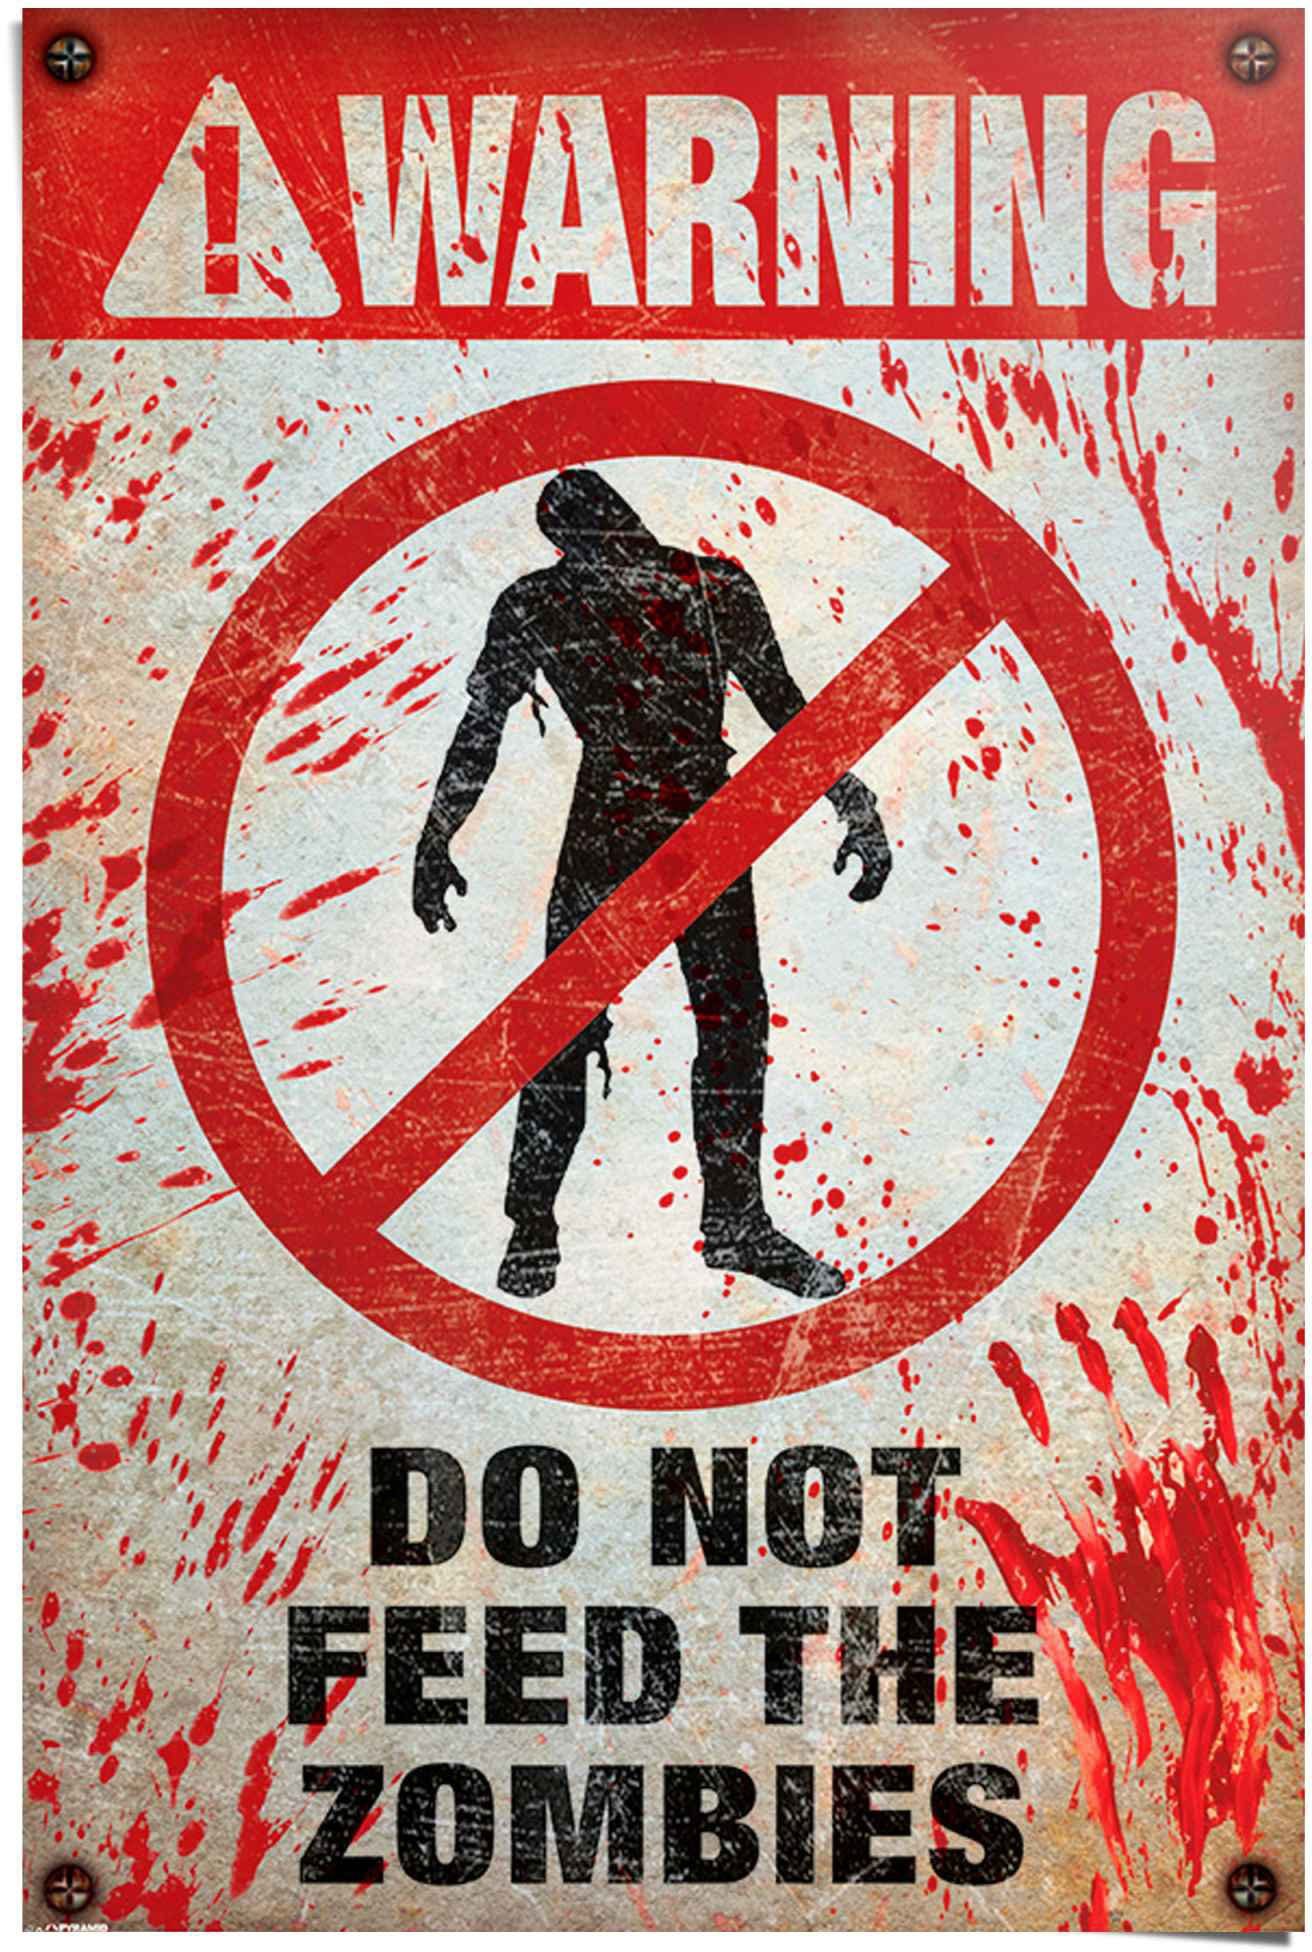 St) Zombies, Do Poster Reinders! Warning! Feed (1 Not The